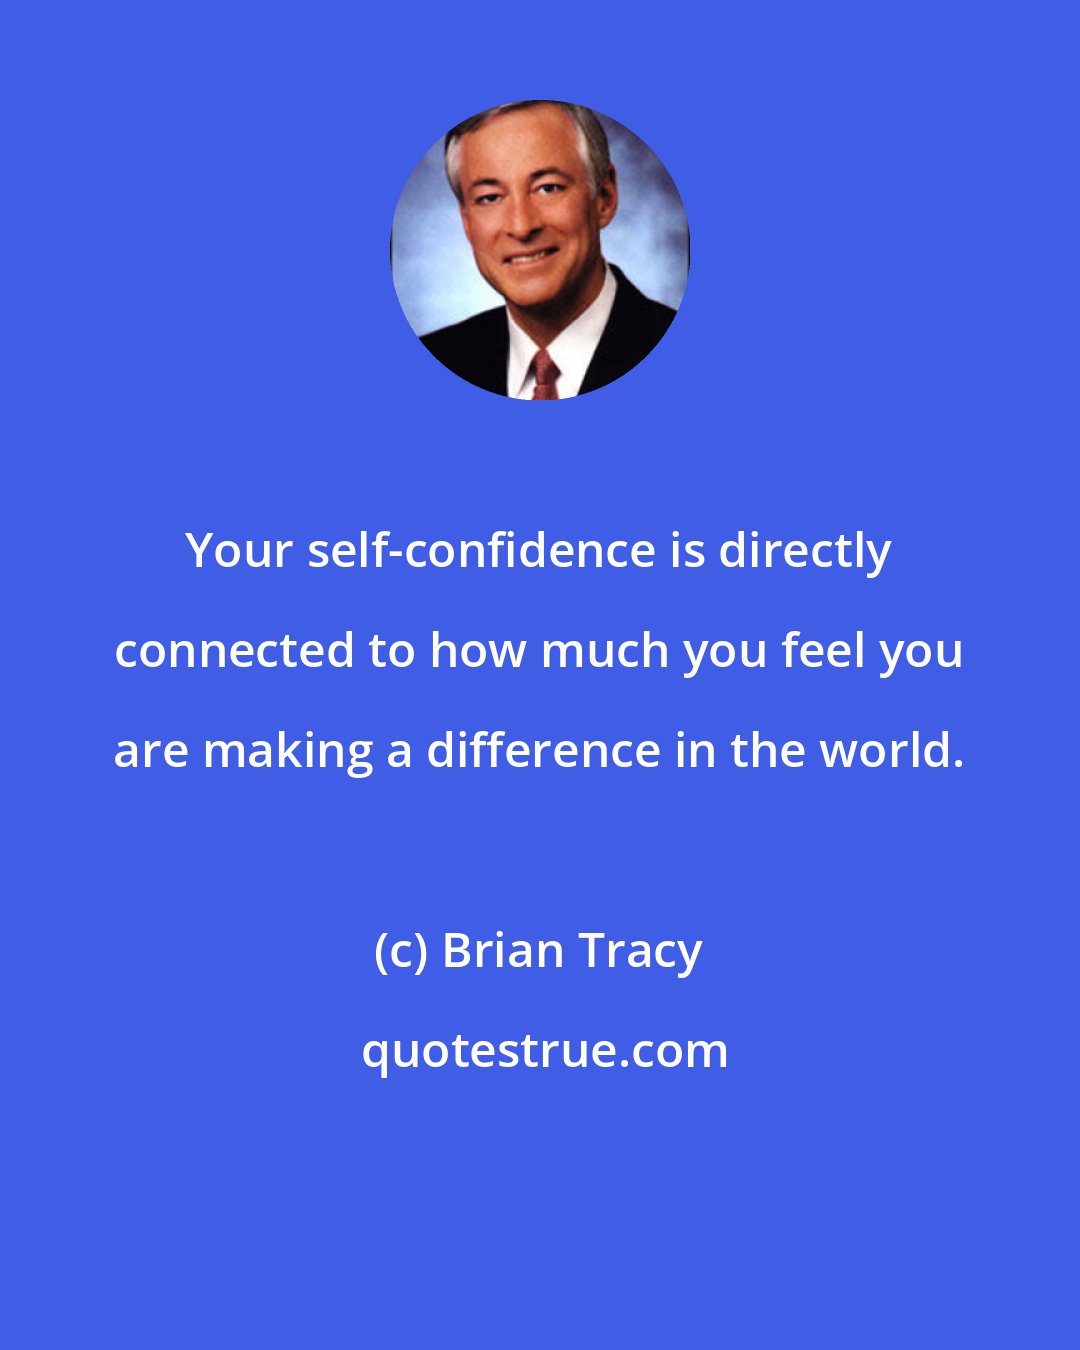 Brian Tracy: Your self-confidence is directly connected to how much you feel you are making a difference in the world.